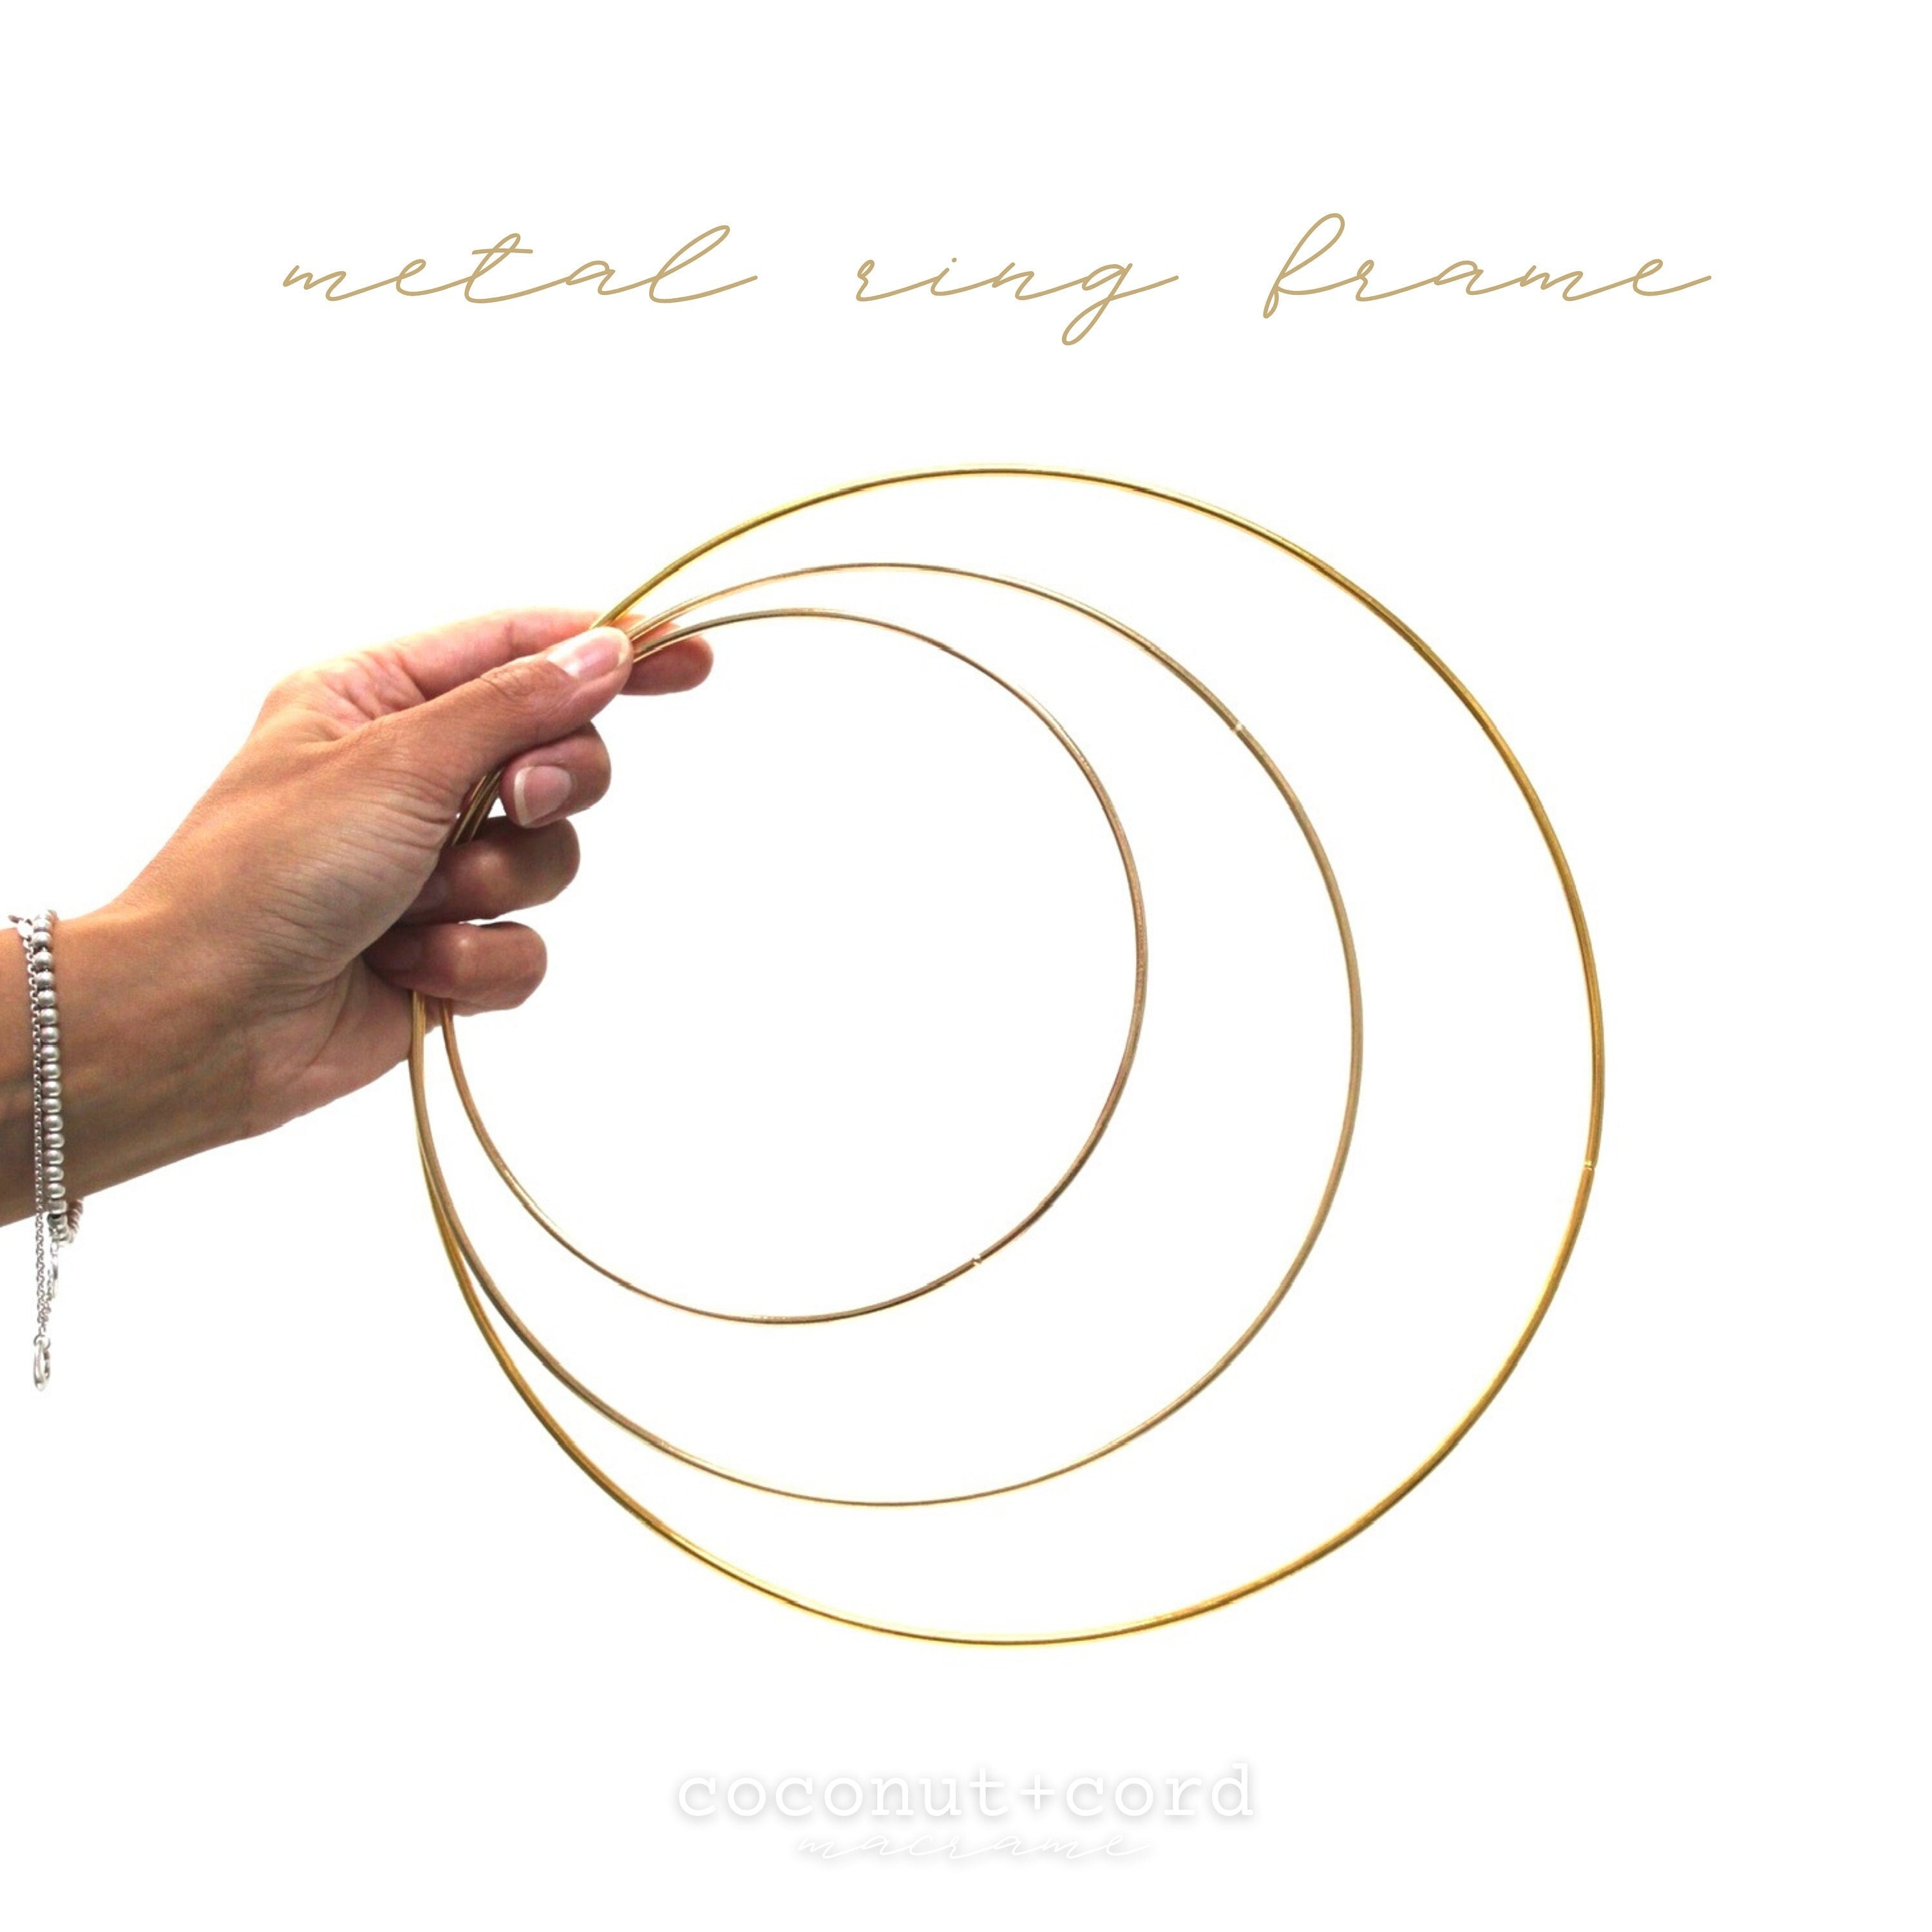 3 inch Gold Metal Rings Hoops for Crafts Bulk Wholesale 10 Pieces